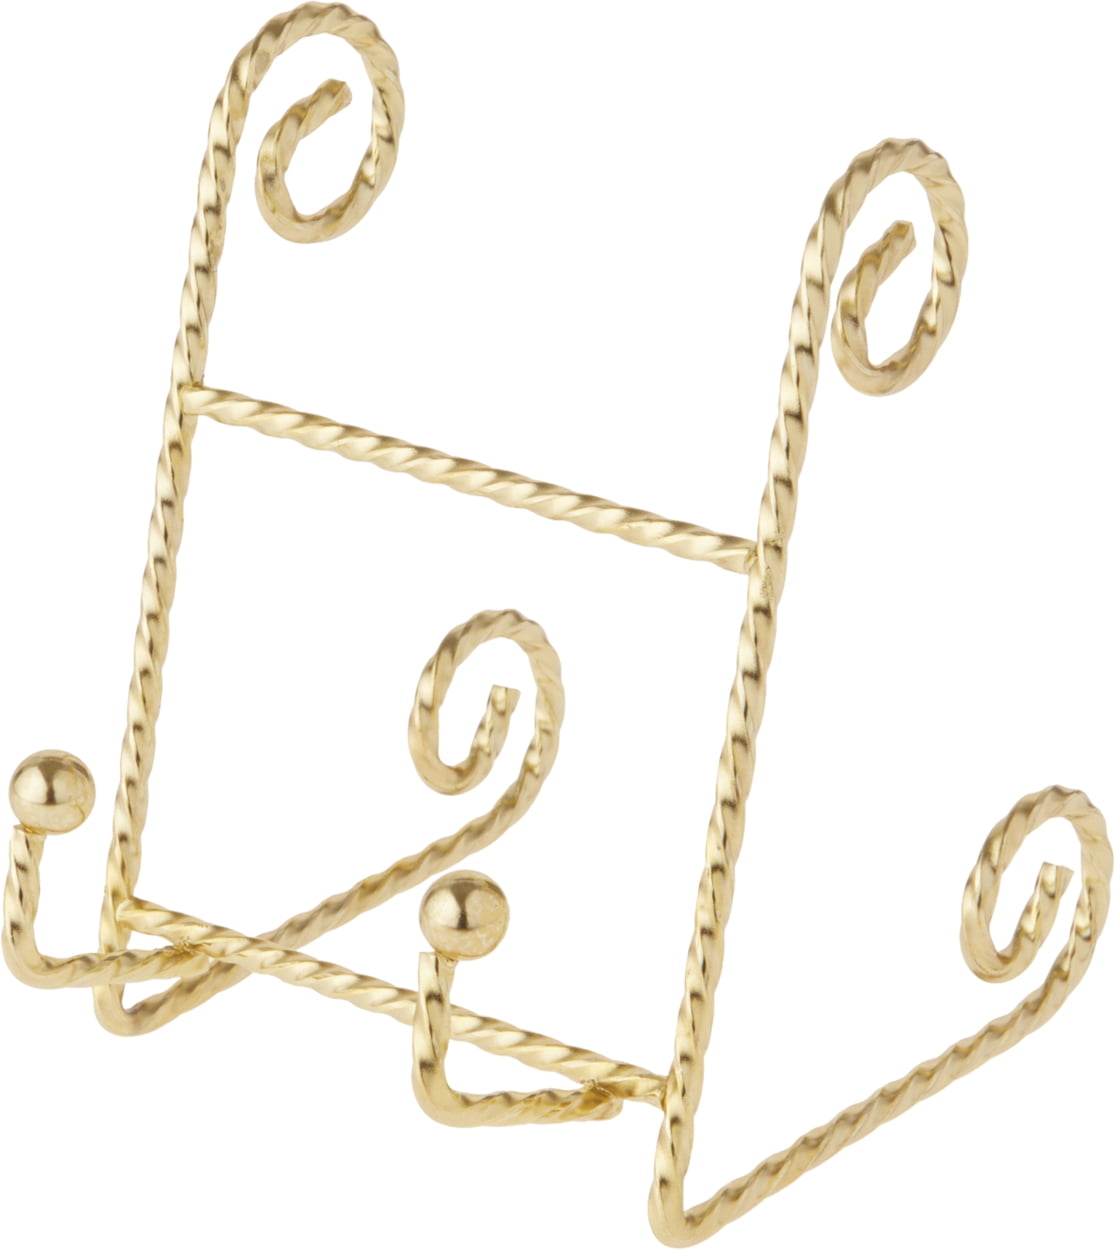 Best Deal for Mocoosy 2 Pack 4 Inch Gold Plate Stands for Display, Metal